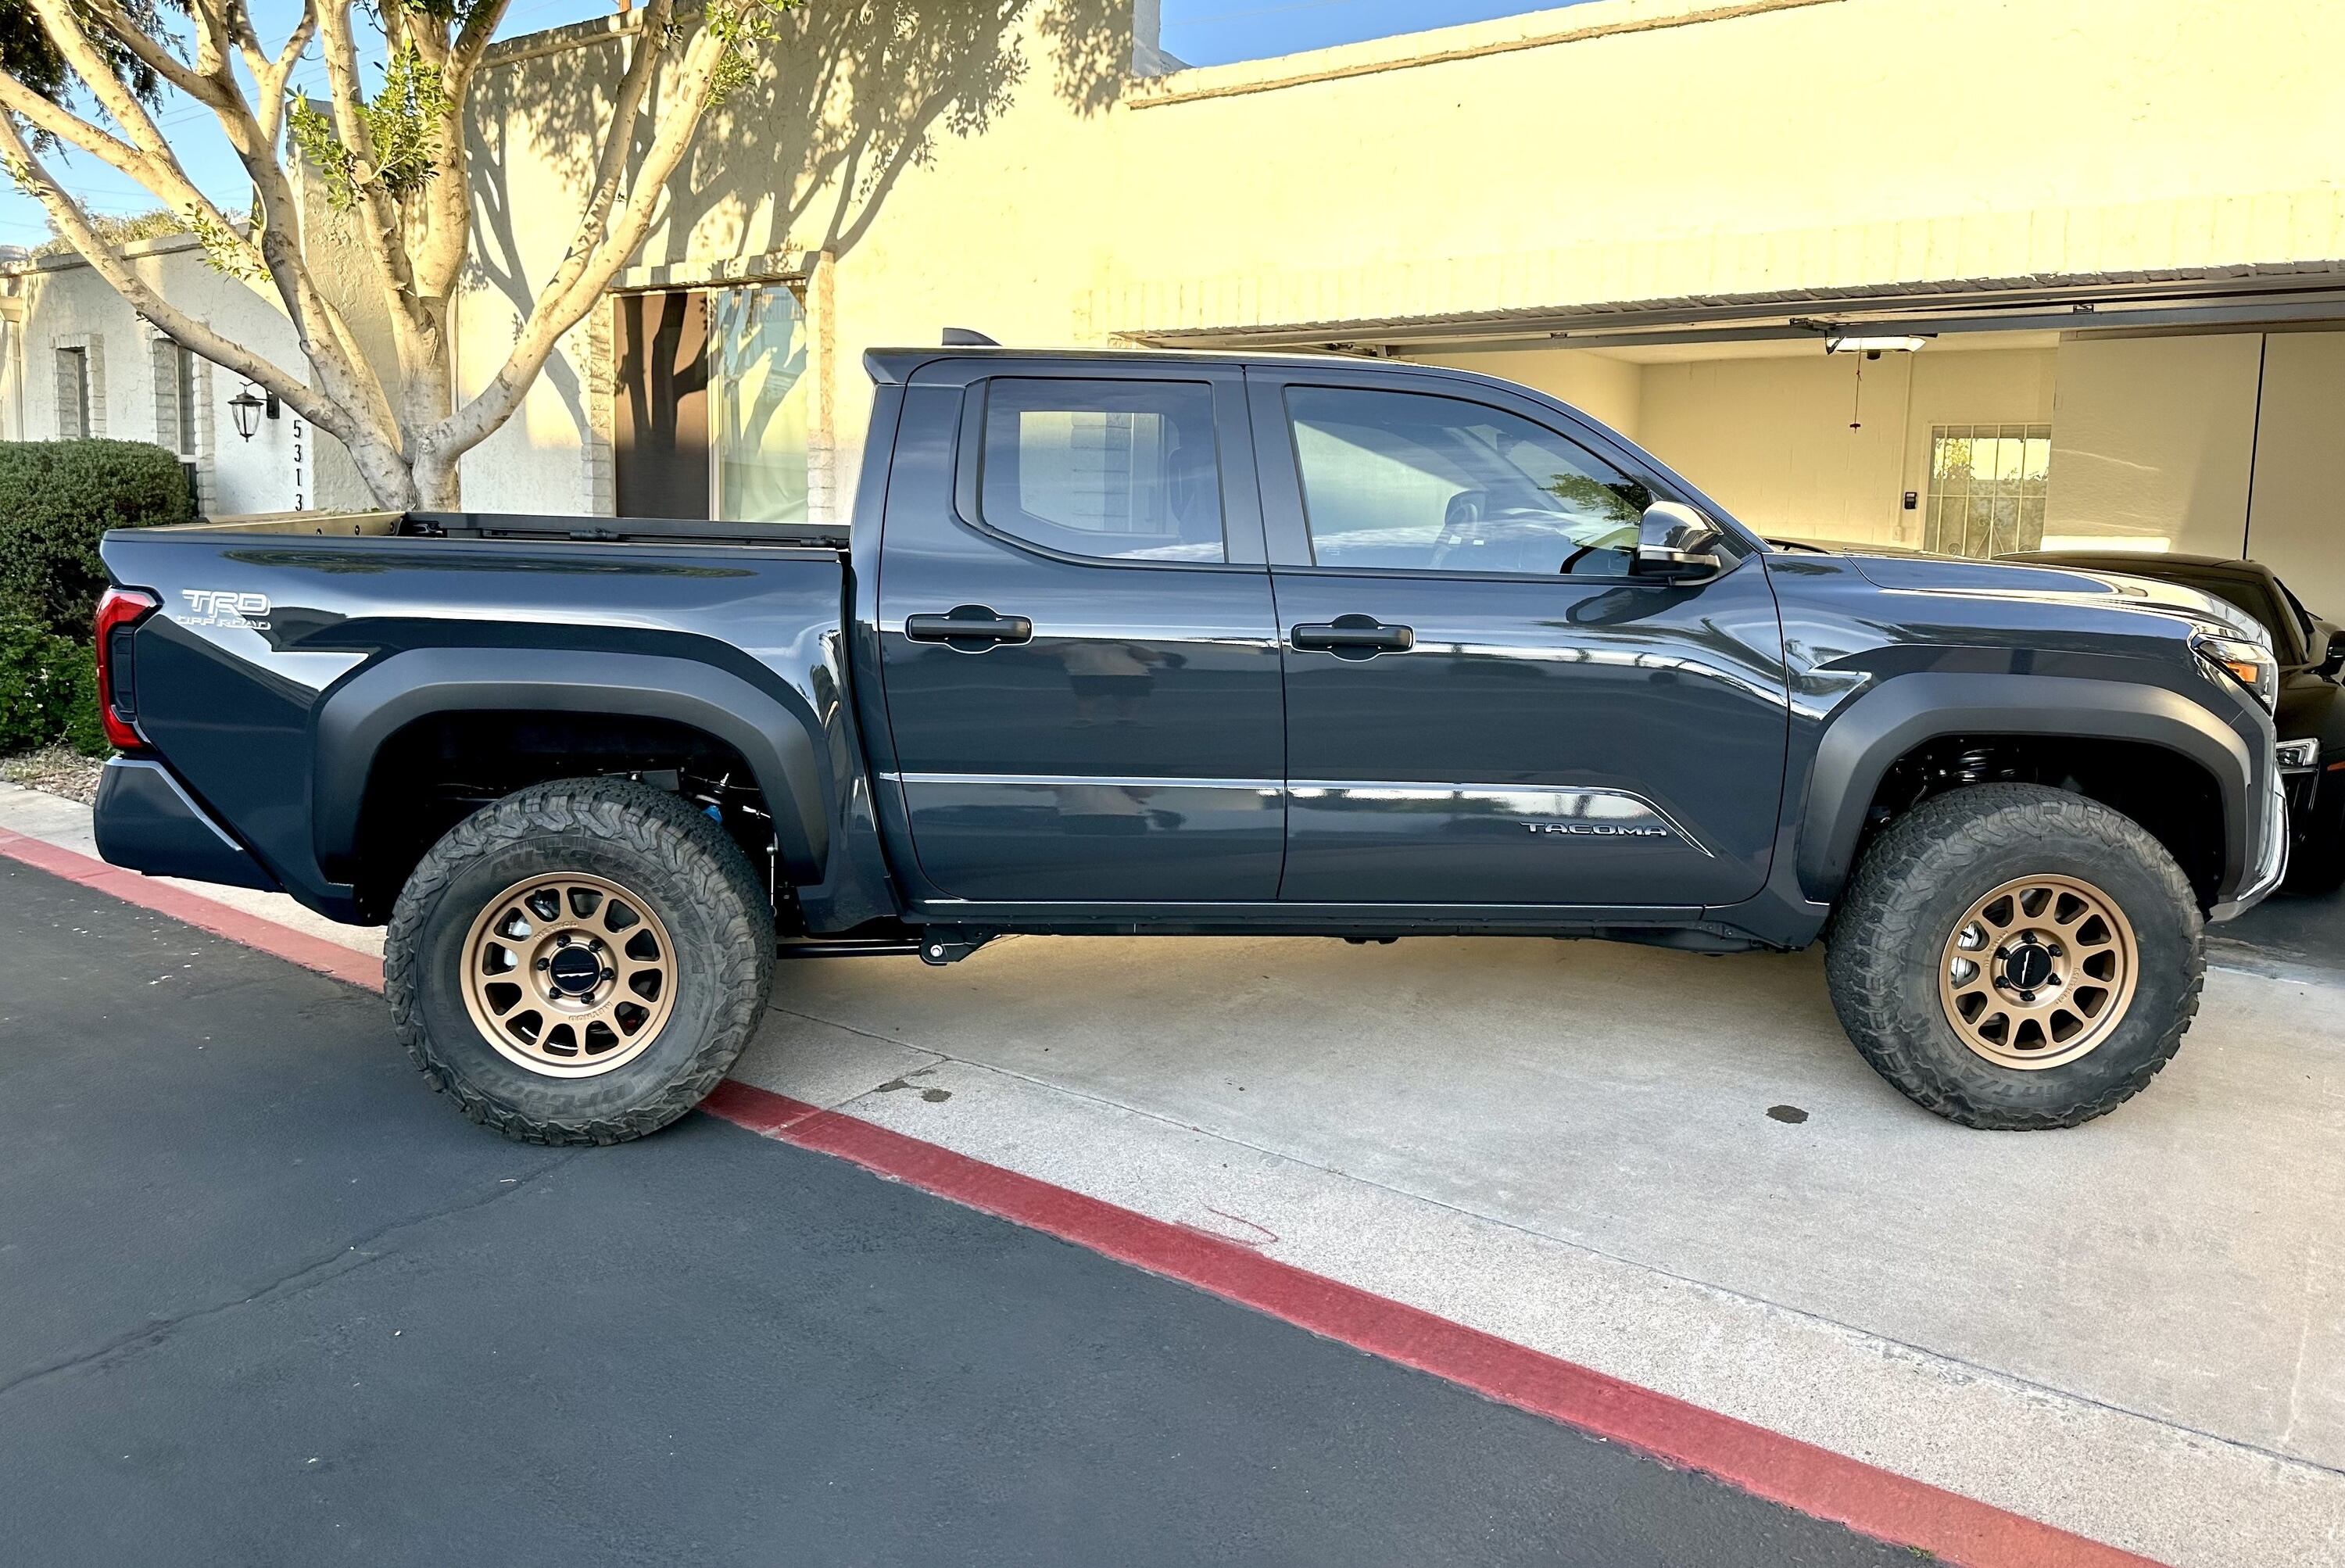 2024 Tacoma 33's (285/70/17 tires) with 703 Method wheels (+35 offset) on factory suspension 2024 Tacoma TRD Off-Road 33's (285:70:17 tires) with 703 Method wheels (+35 offset) on factory suspension 2024 Tacoma 